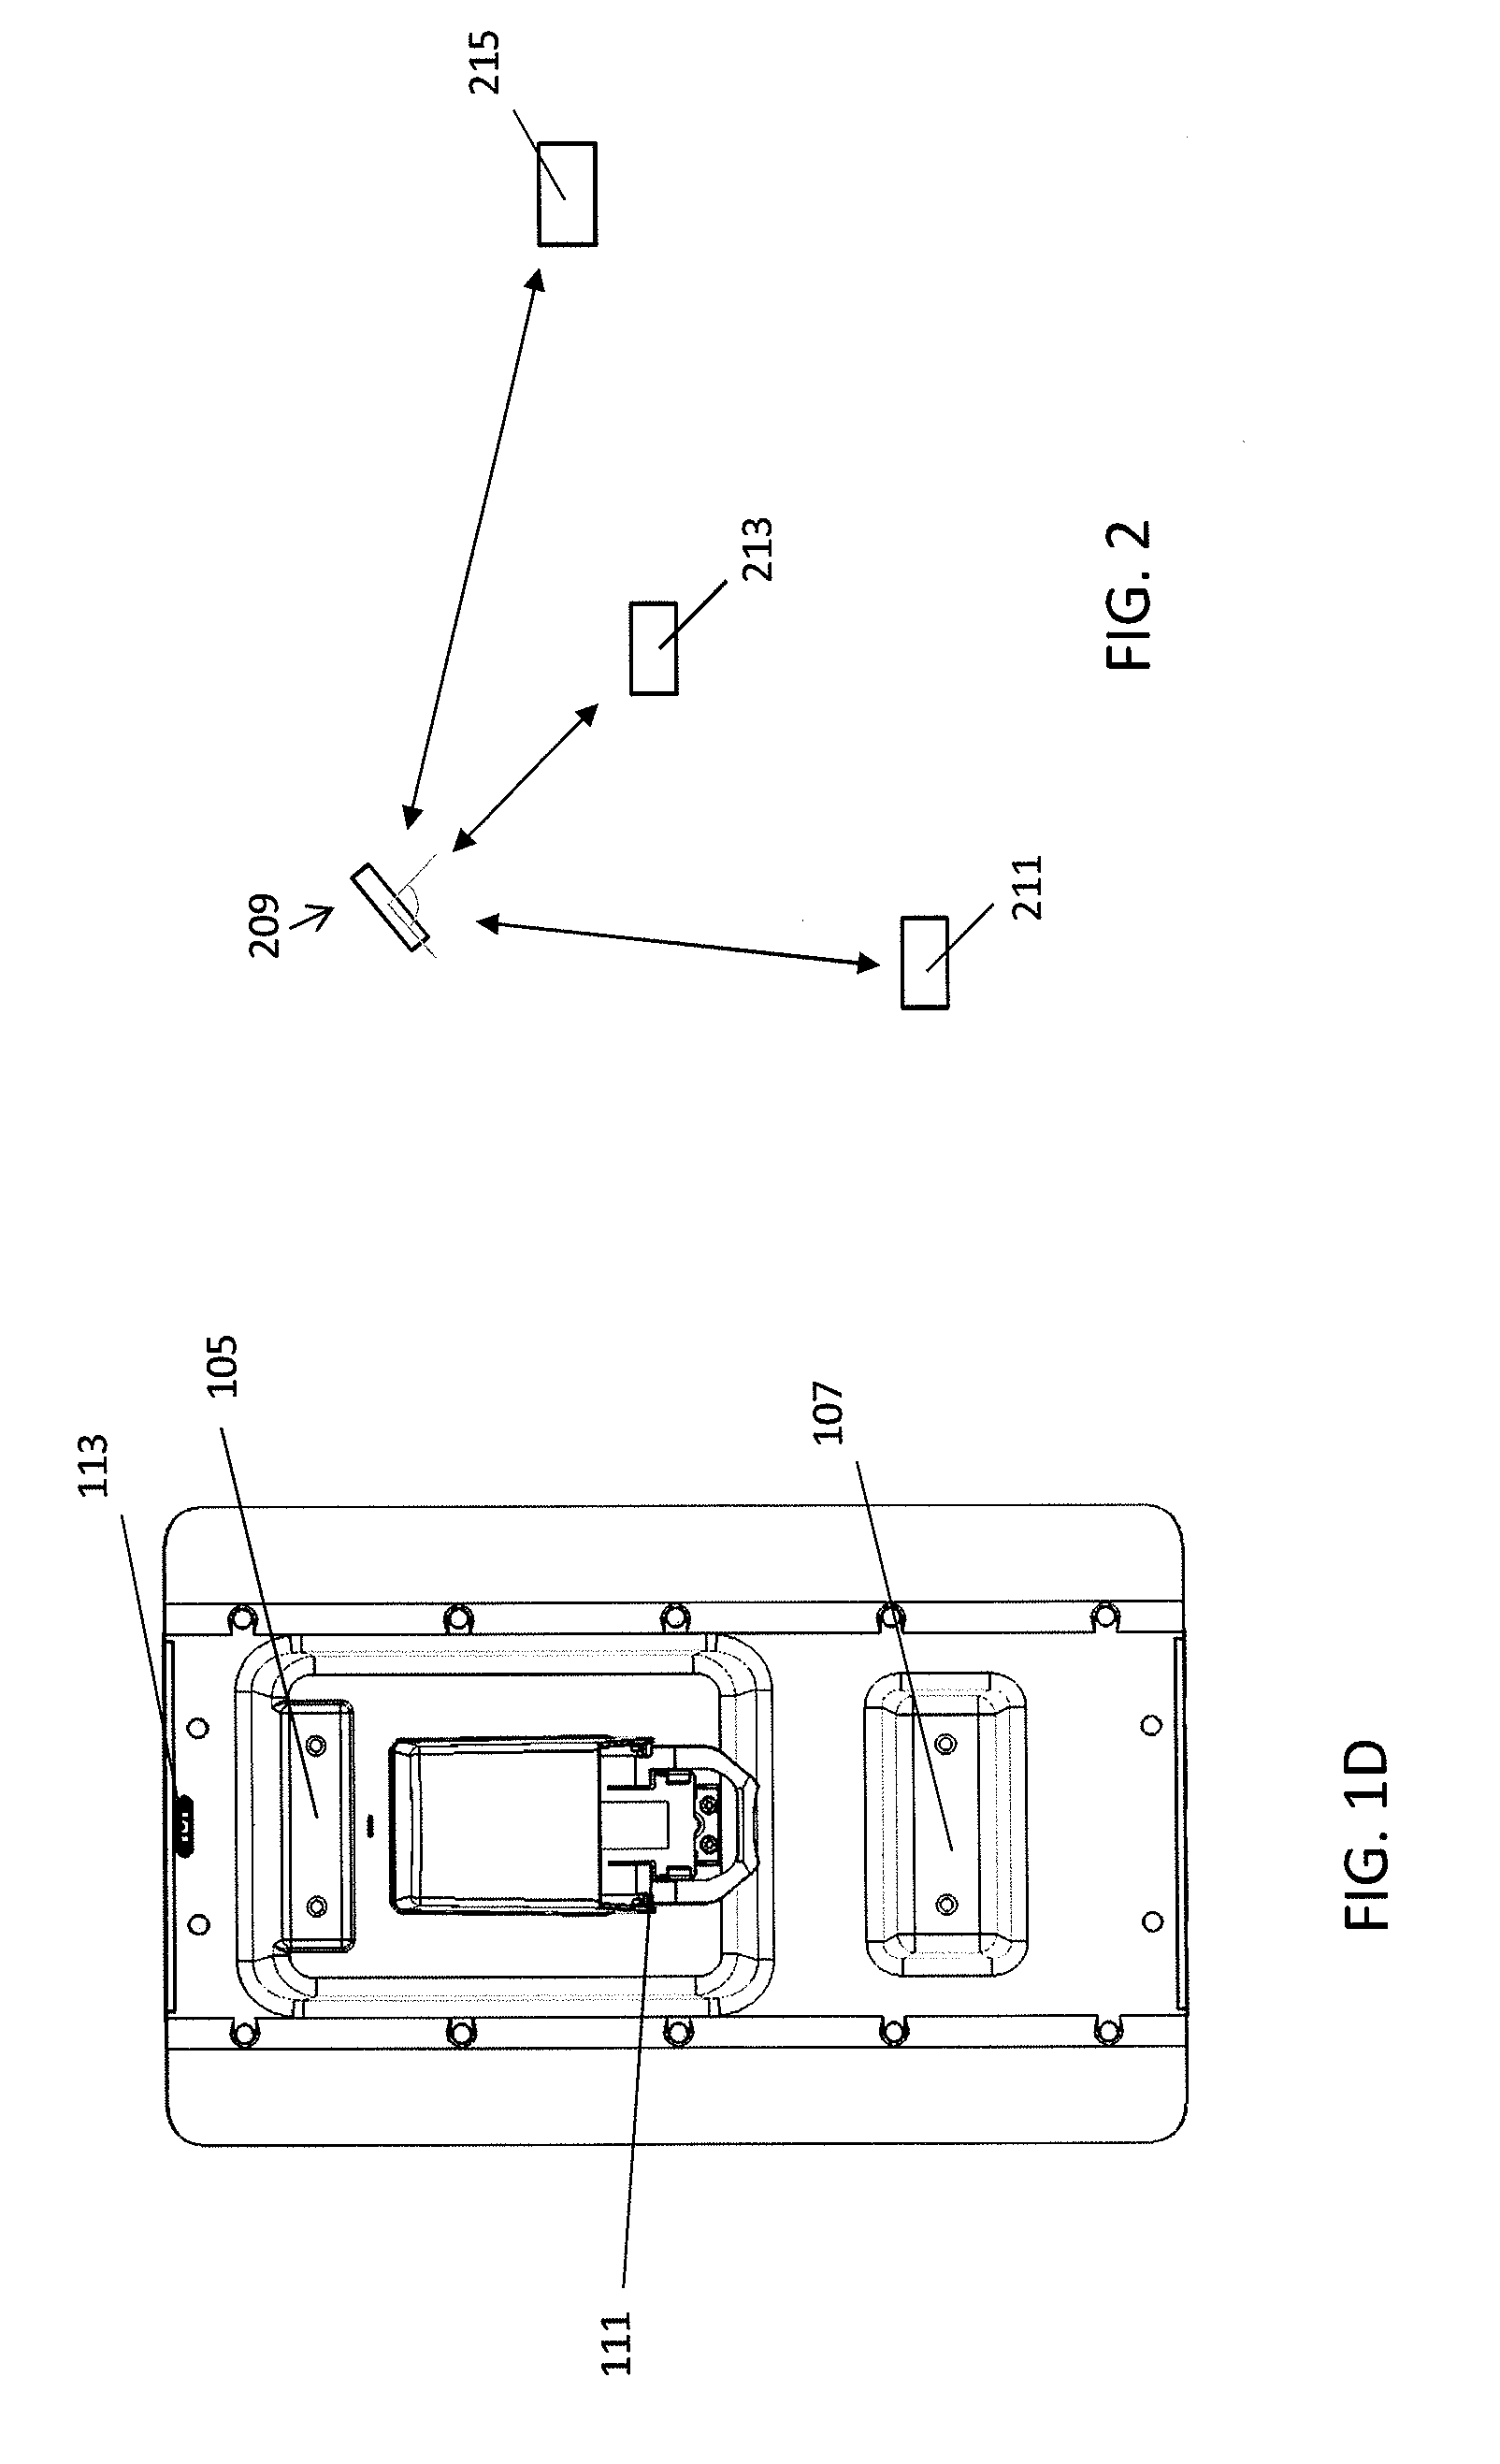 Methods of operating an access point using a plurality of directional beams